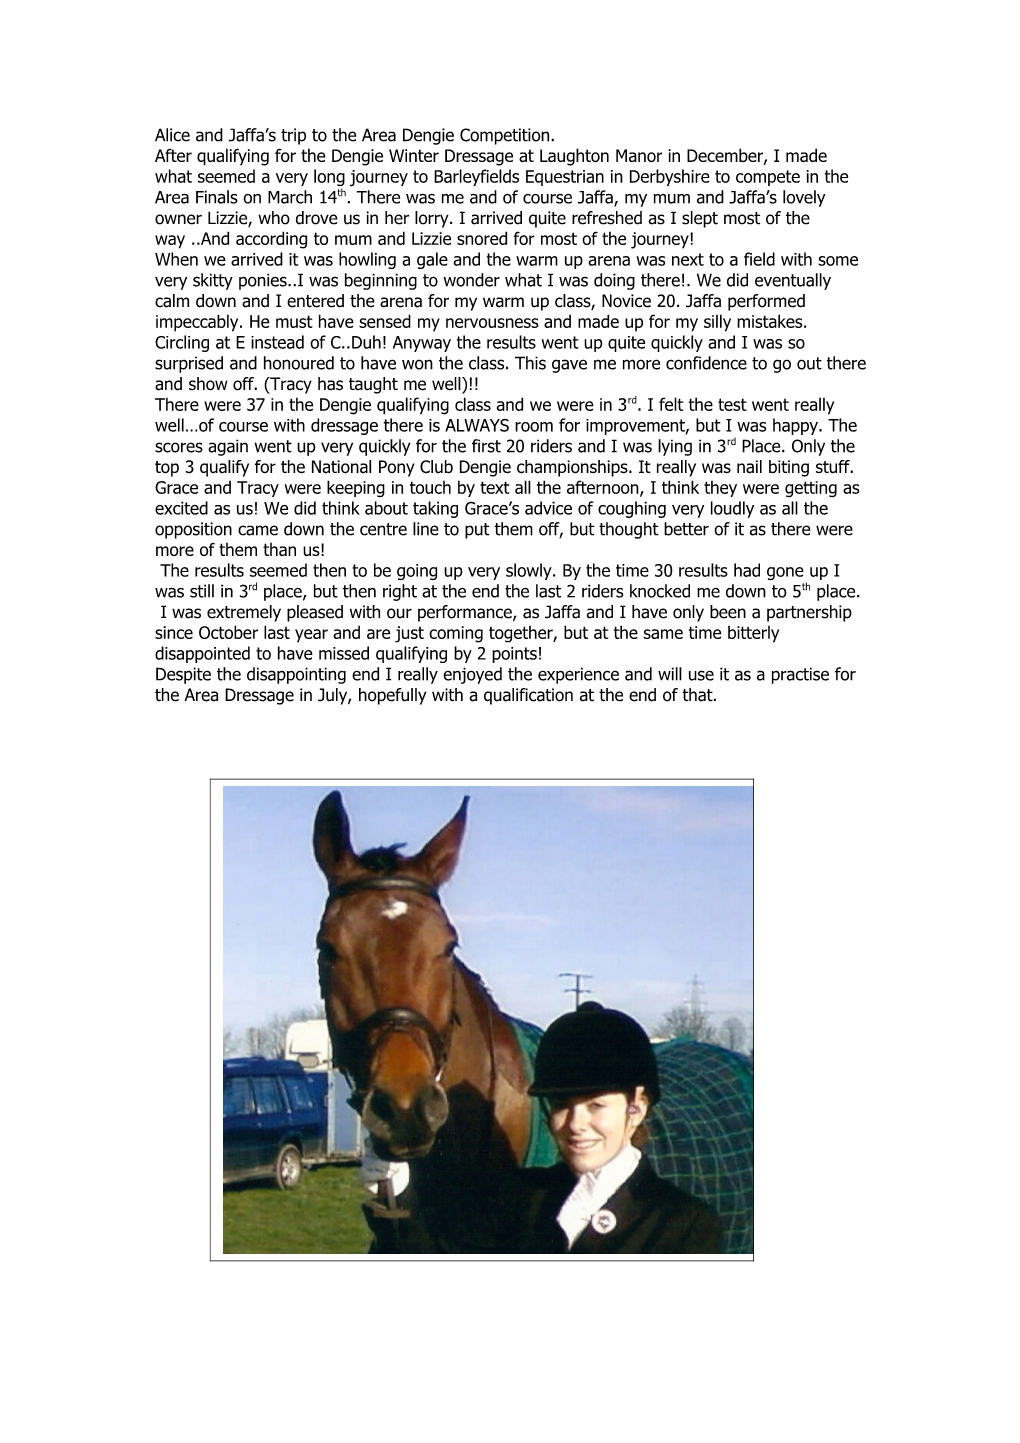 After Qualifying for the Dengie Winter Dressage at Laughton Manor in December, I Made What